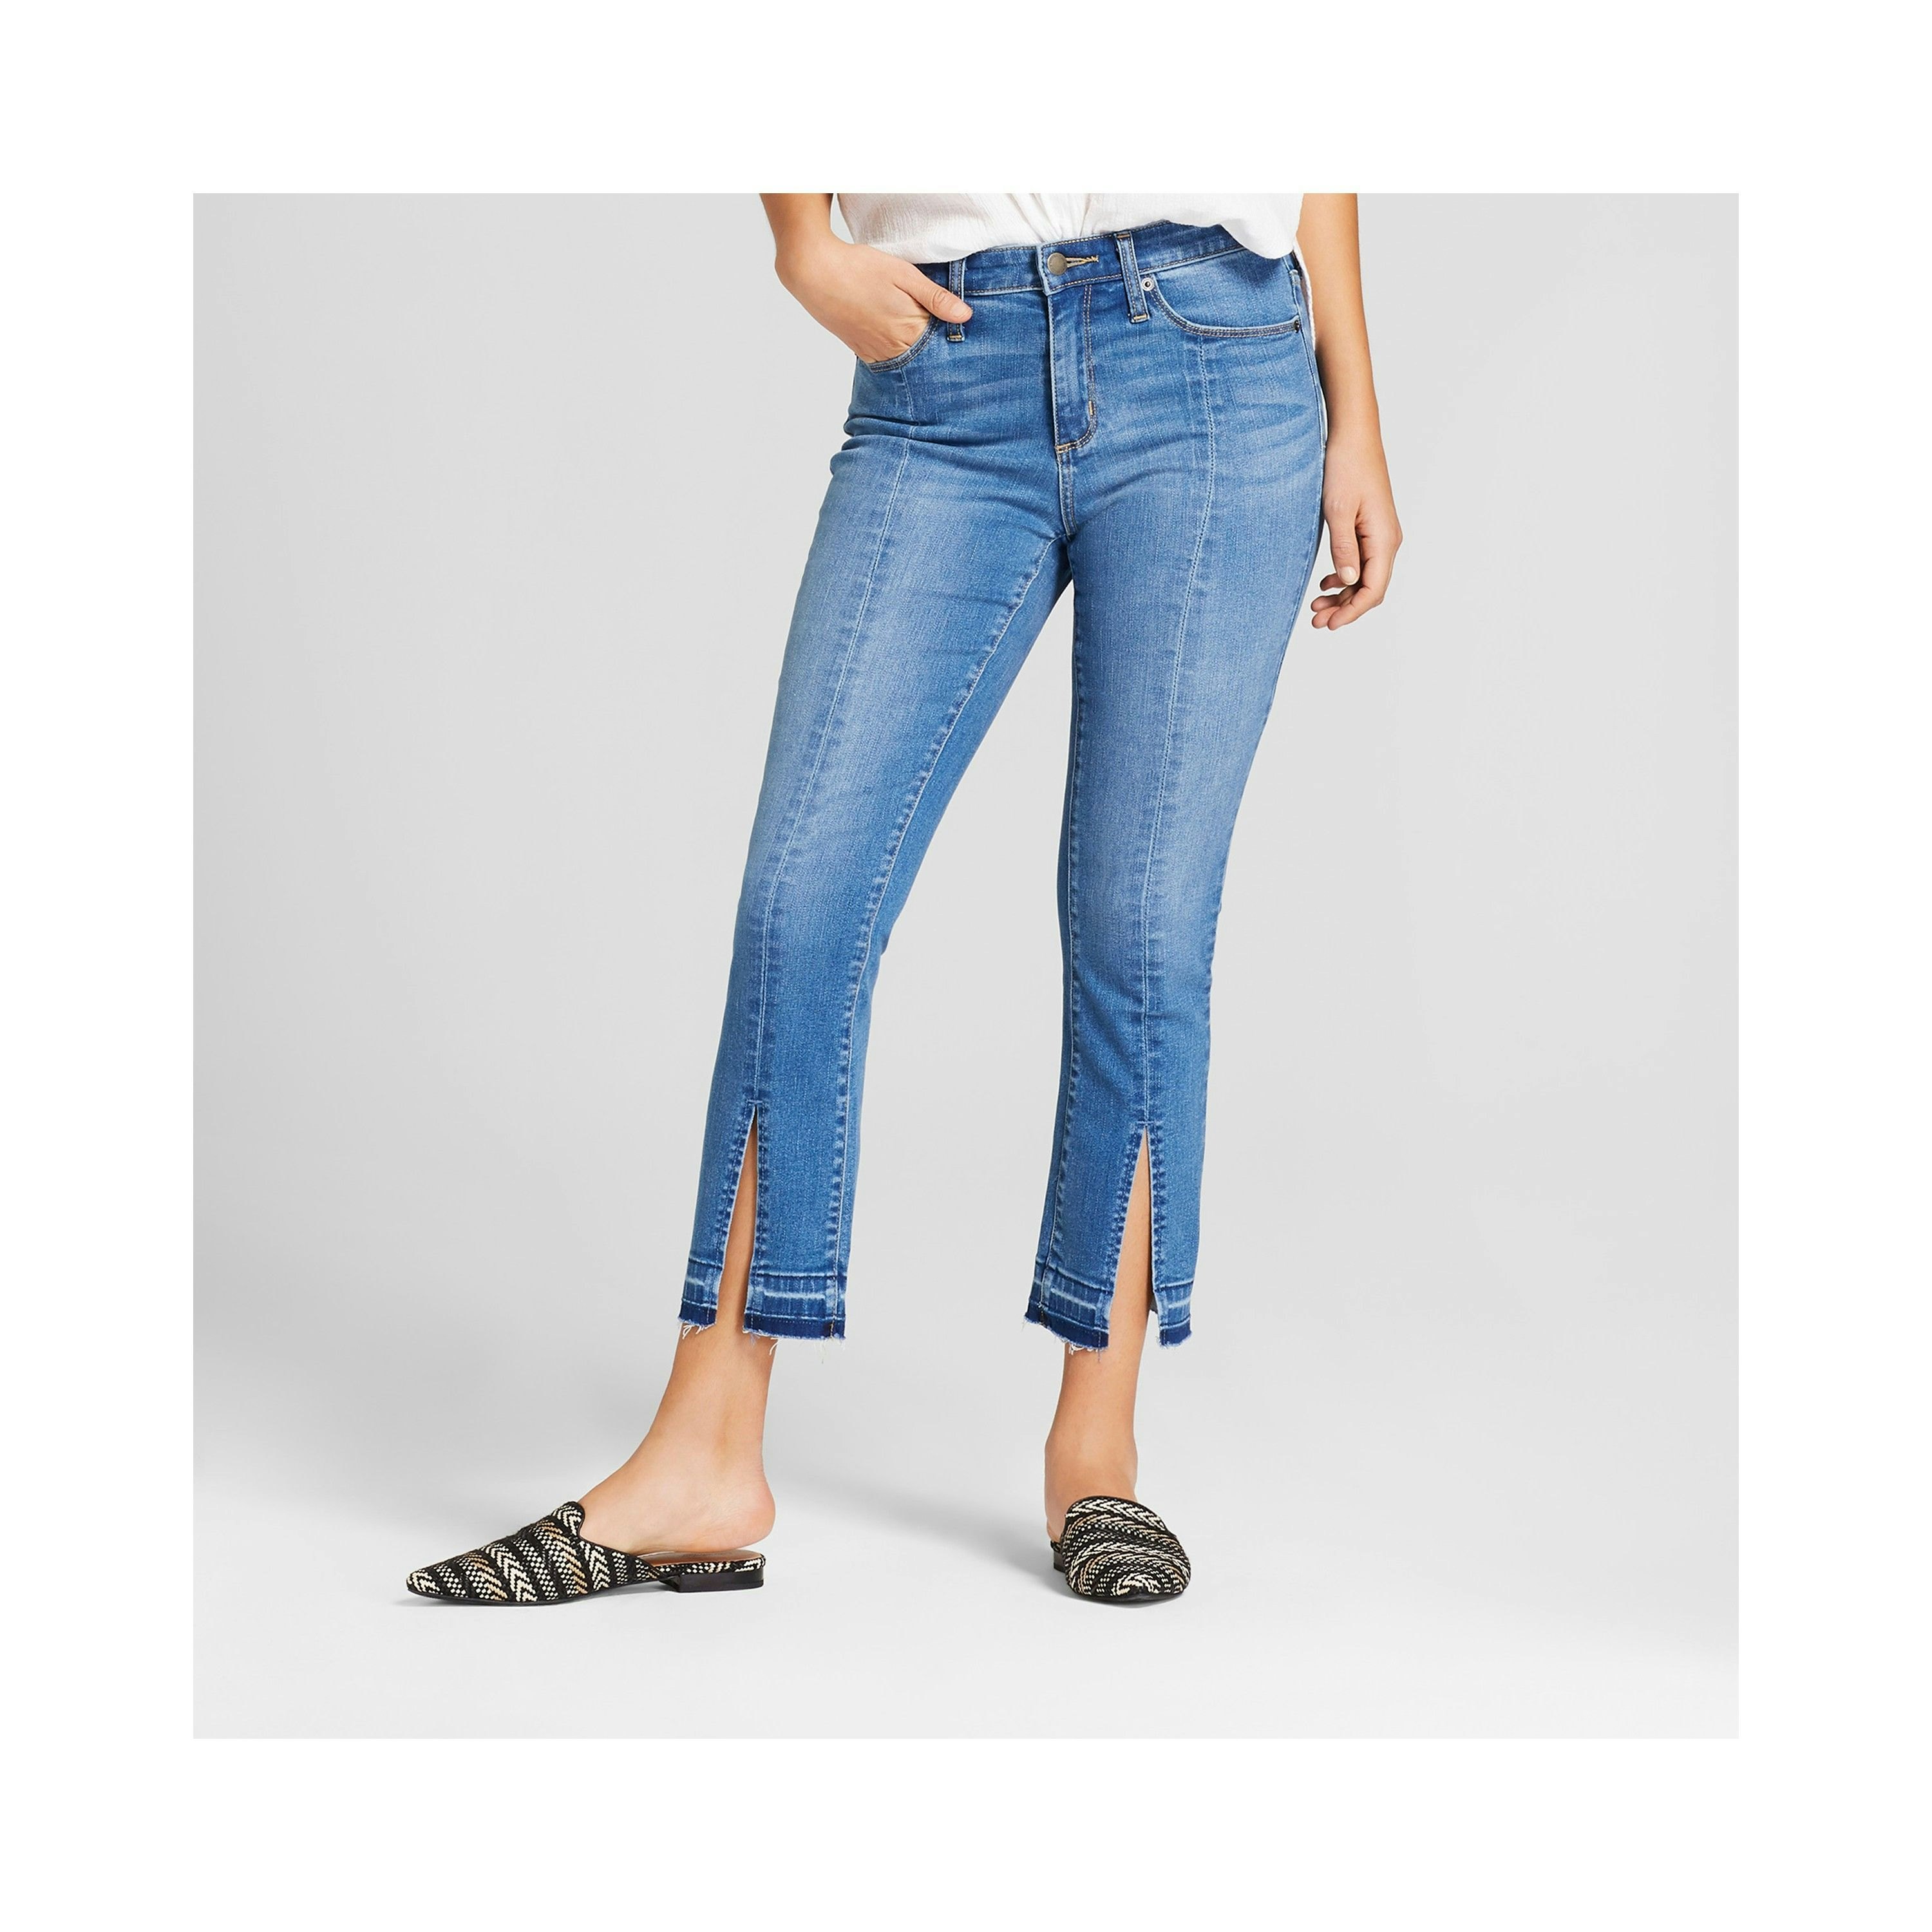 target womens jeans tall